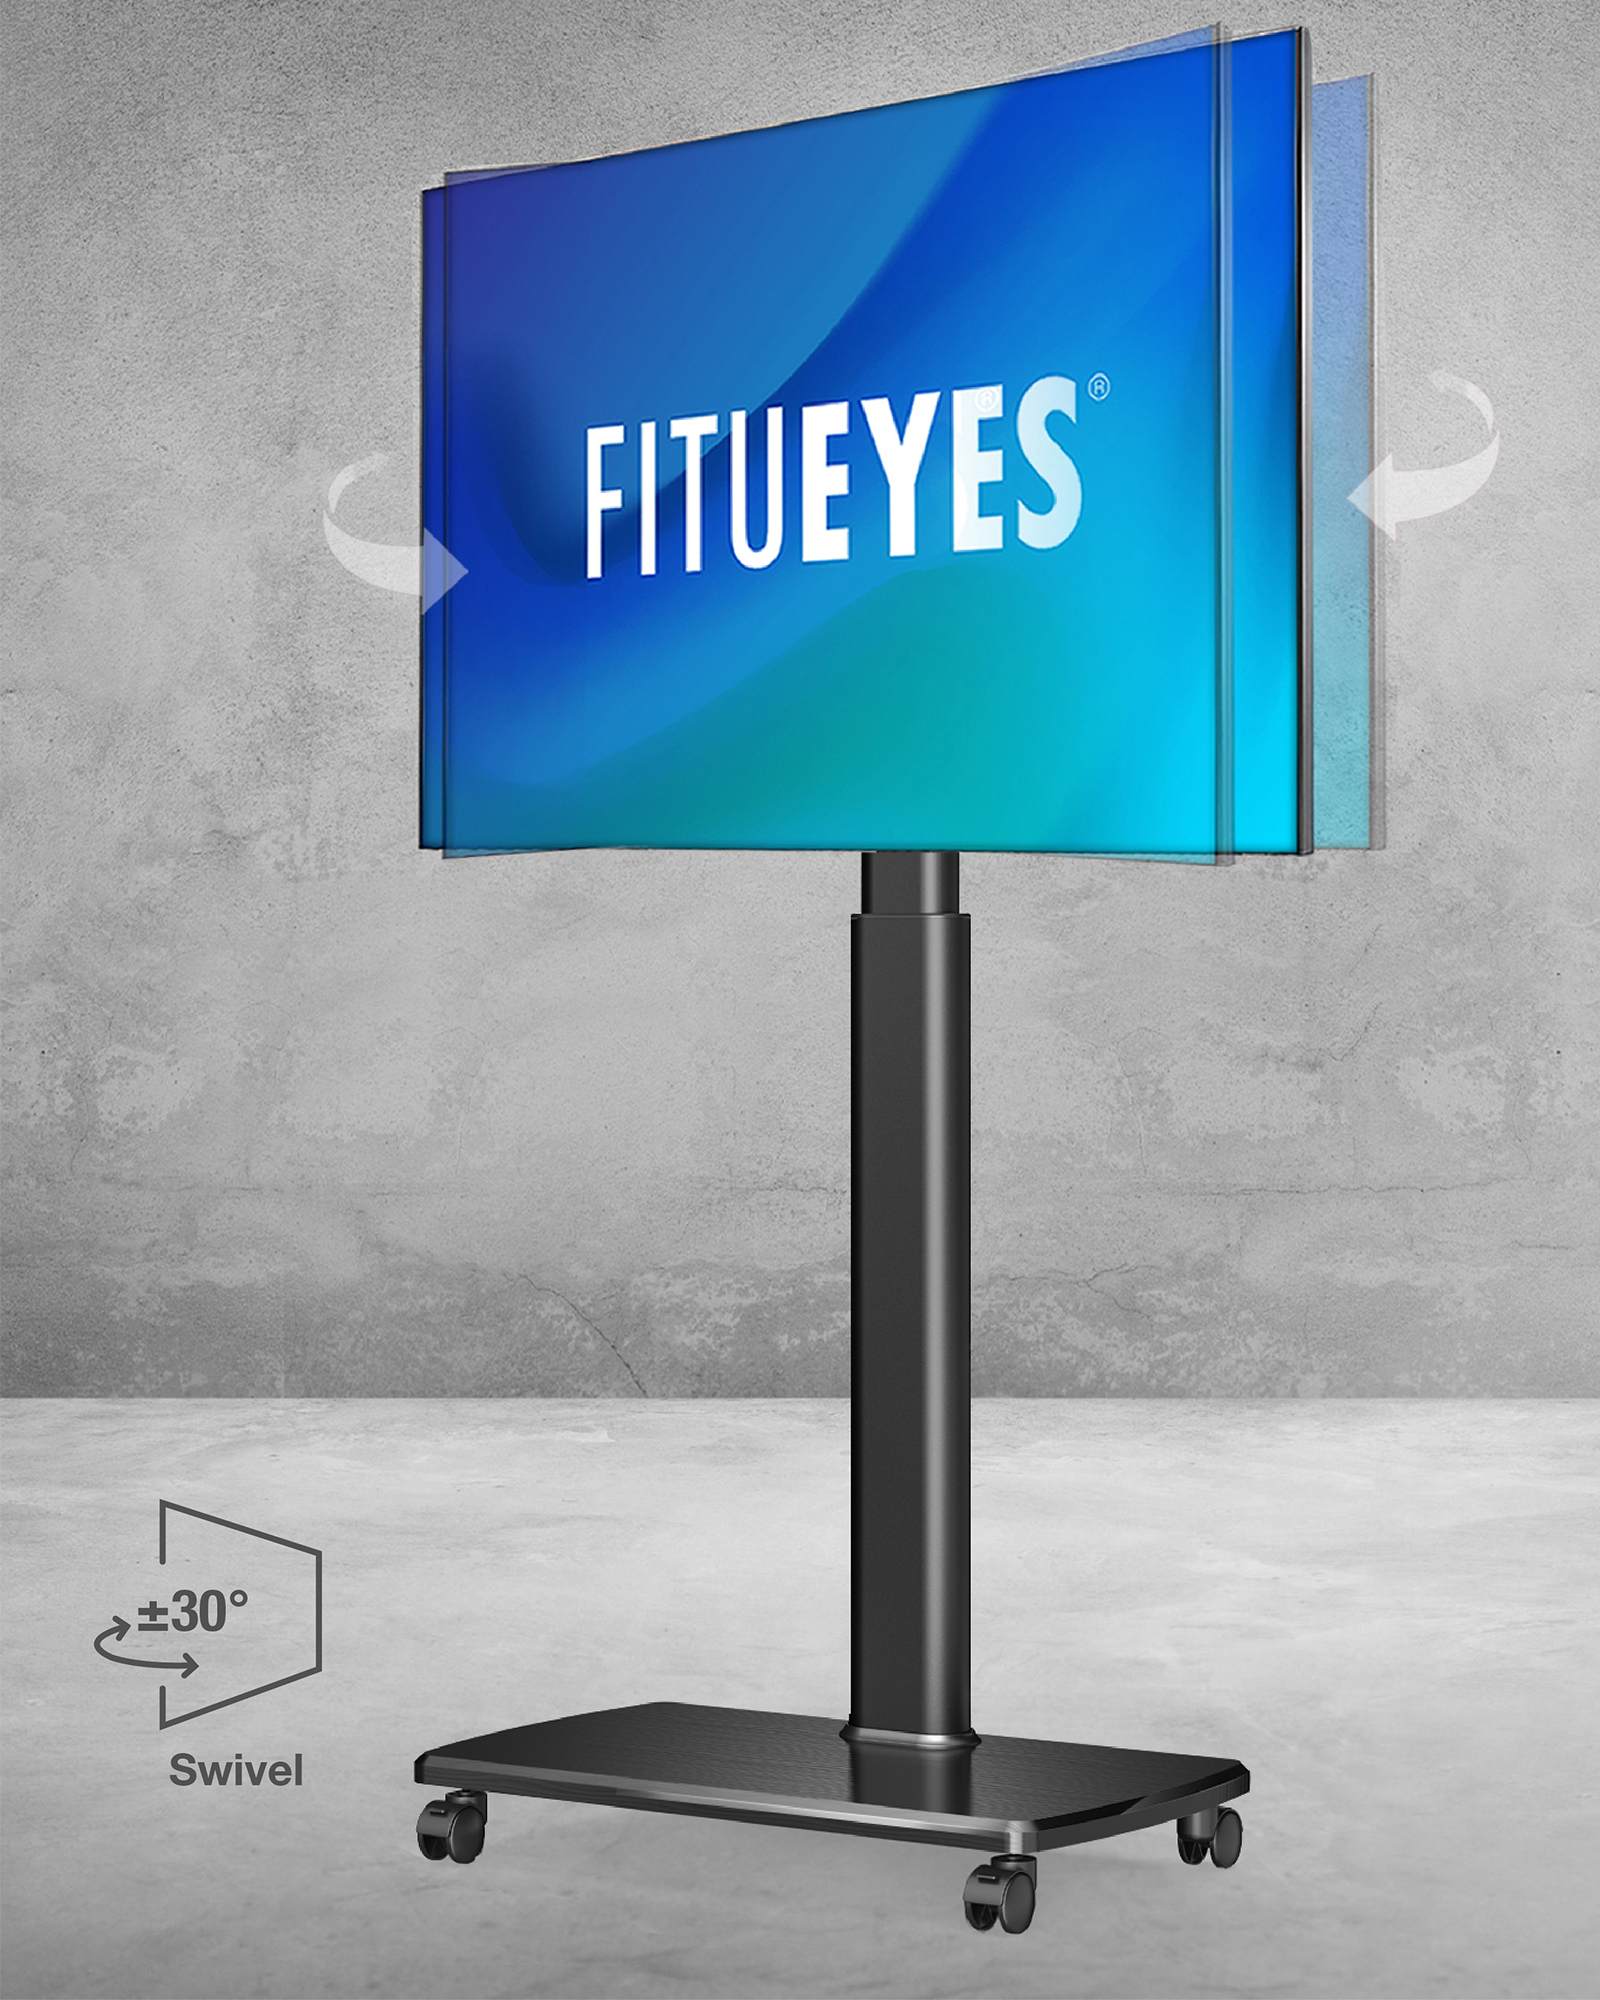 FITUEYES Universal Floor TV Stand Cart with Swivel Mount, Height Adjustable for Most TVs up to 65 Inch, Upgrade Sturdy Wooden Base and Lockable Wheels, FT-E1652WB - image 5 of 8